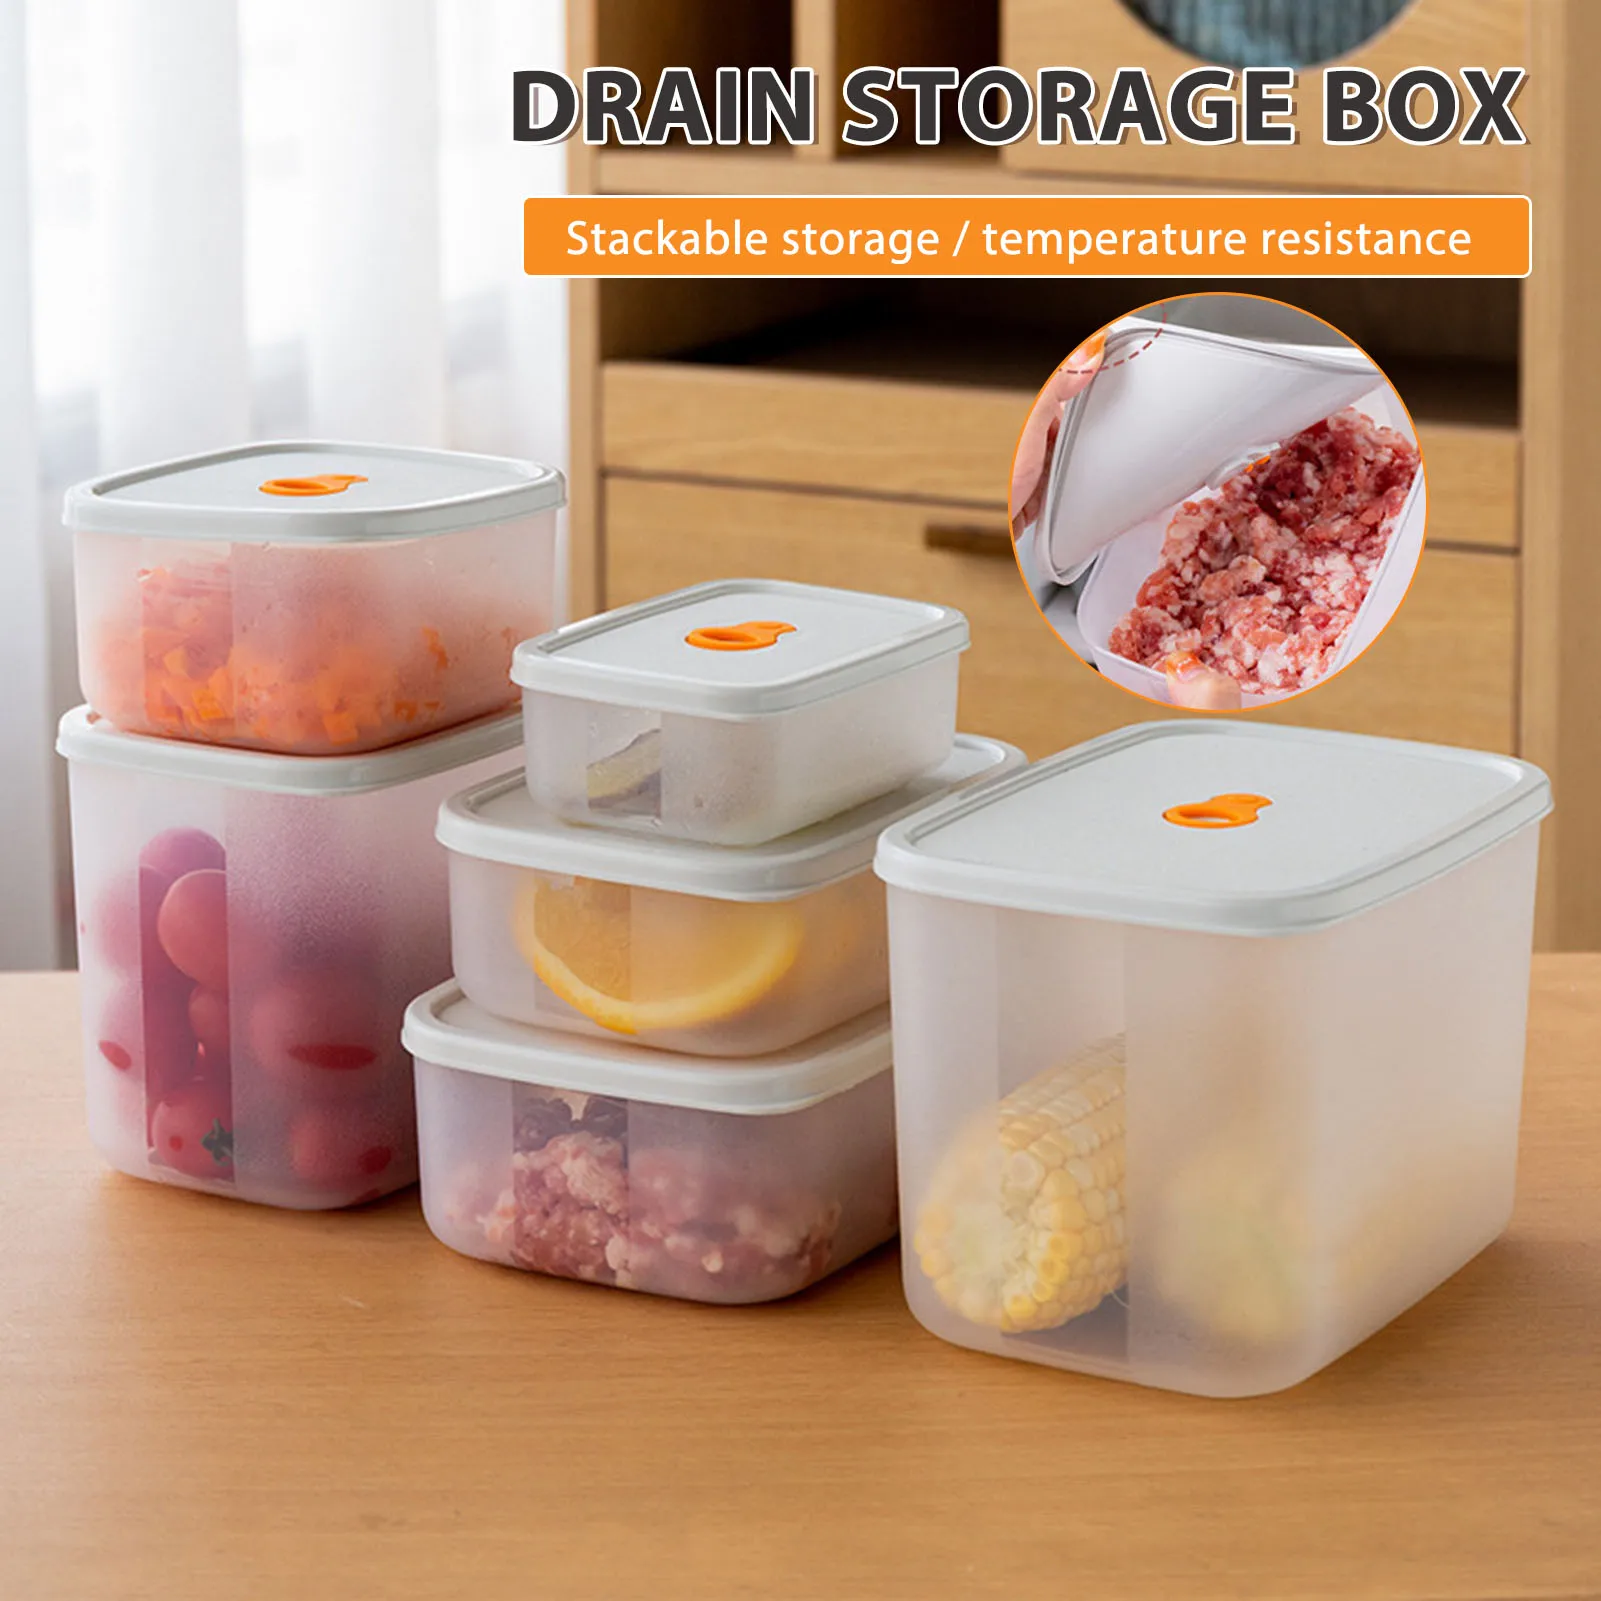 

Refrigerator Food Storage Containers with Lid Pp Stackable Freezer Organizer BPA Free Airtight Kitchen Accessories Organizer